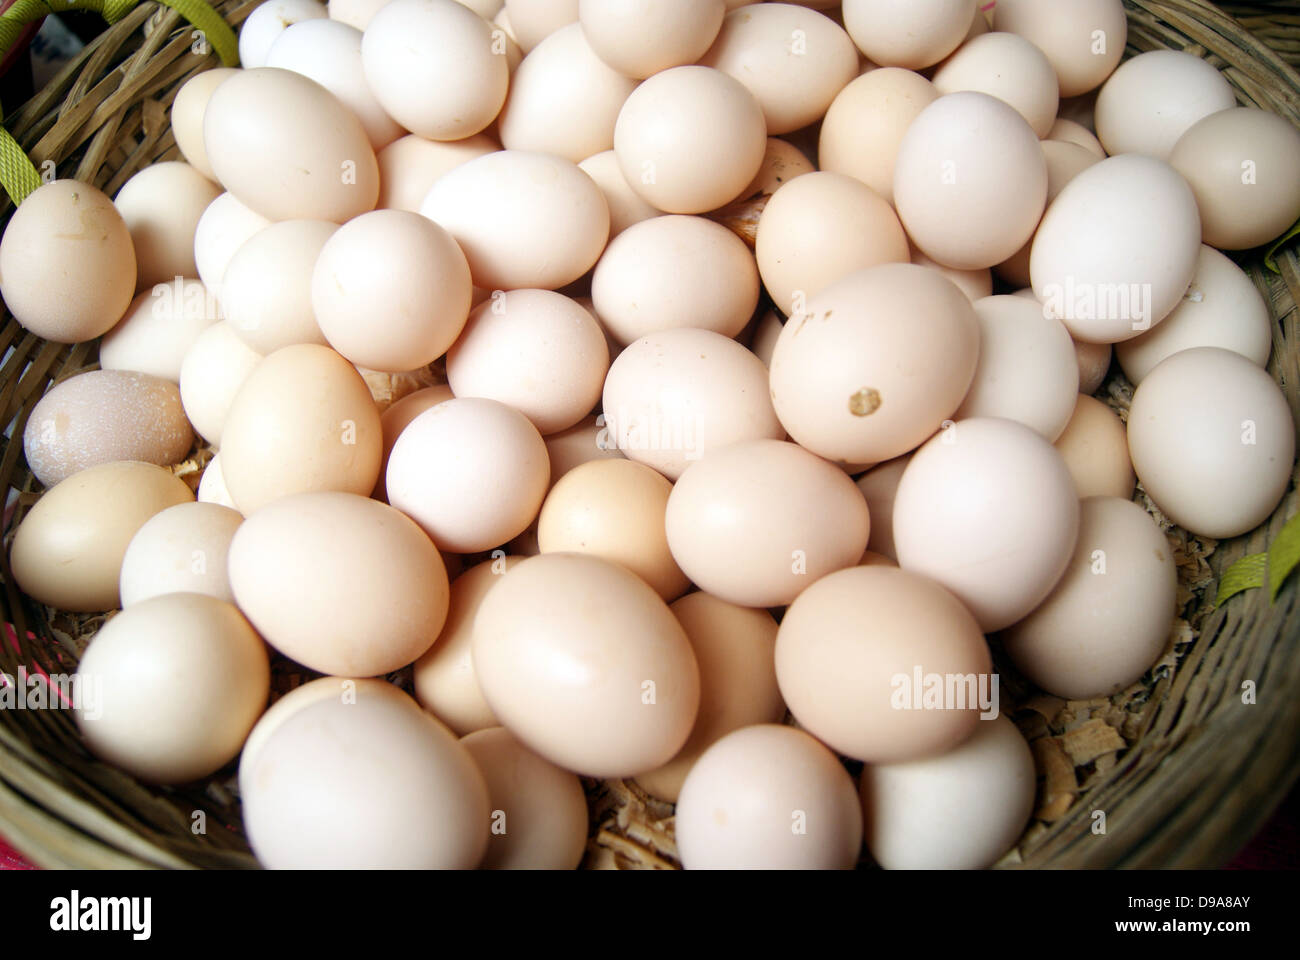 A pile of eggs, at a farmers' market. Stock Photo